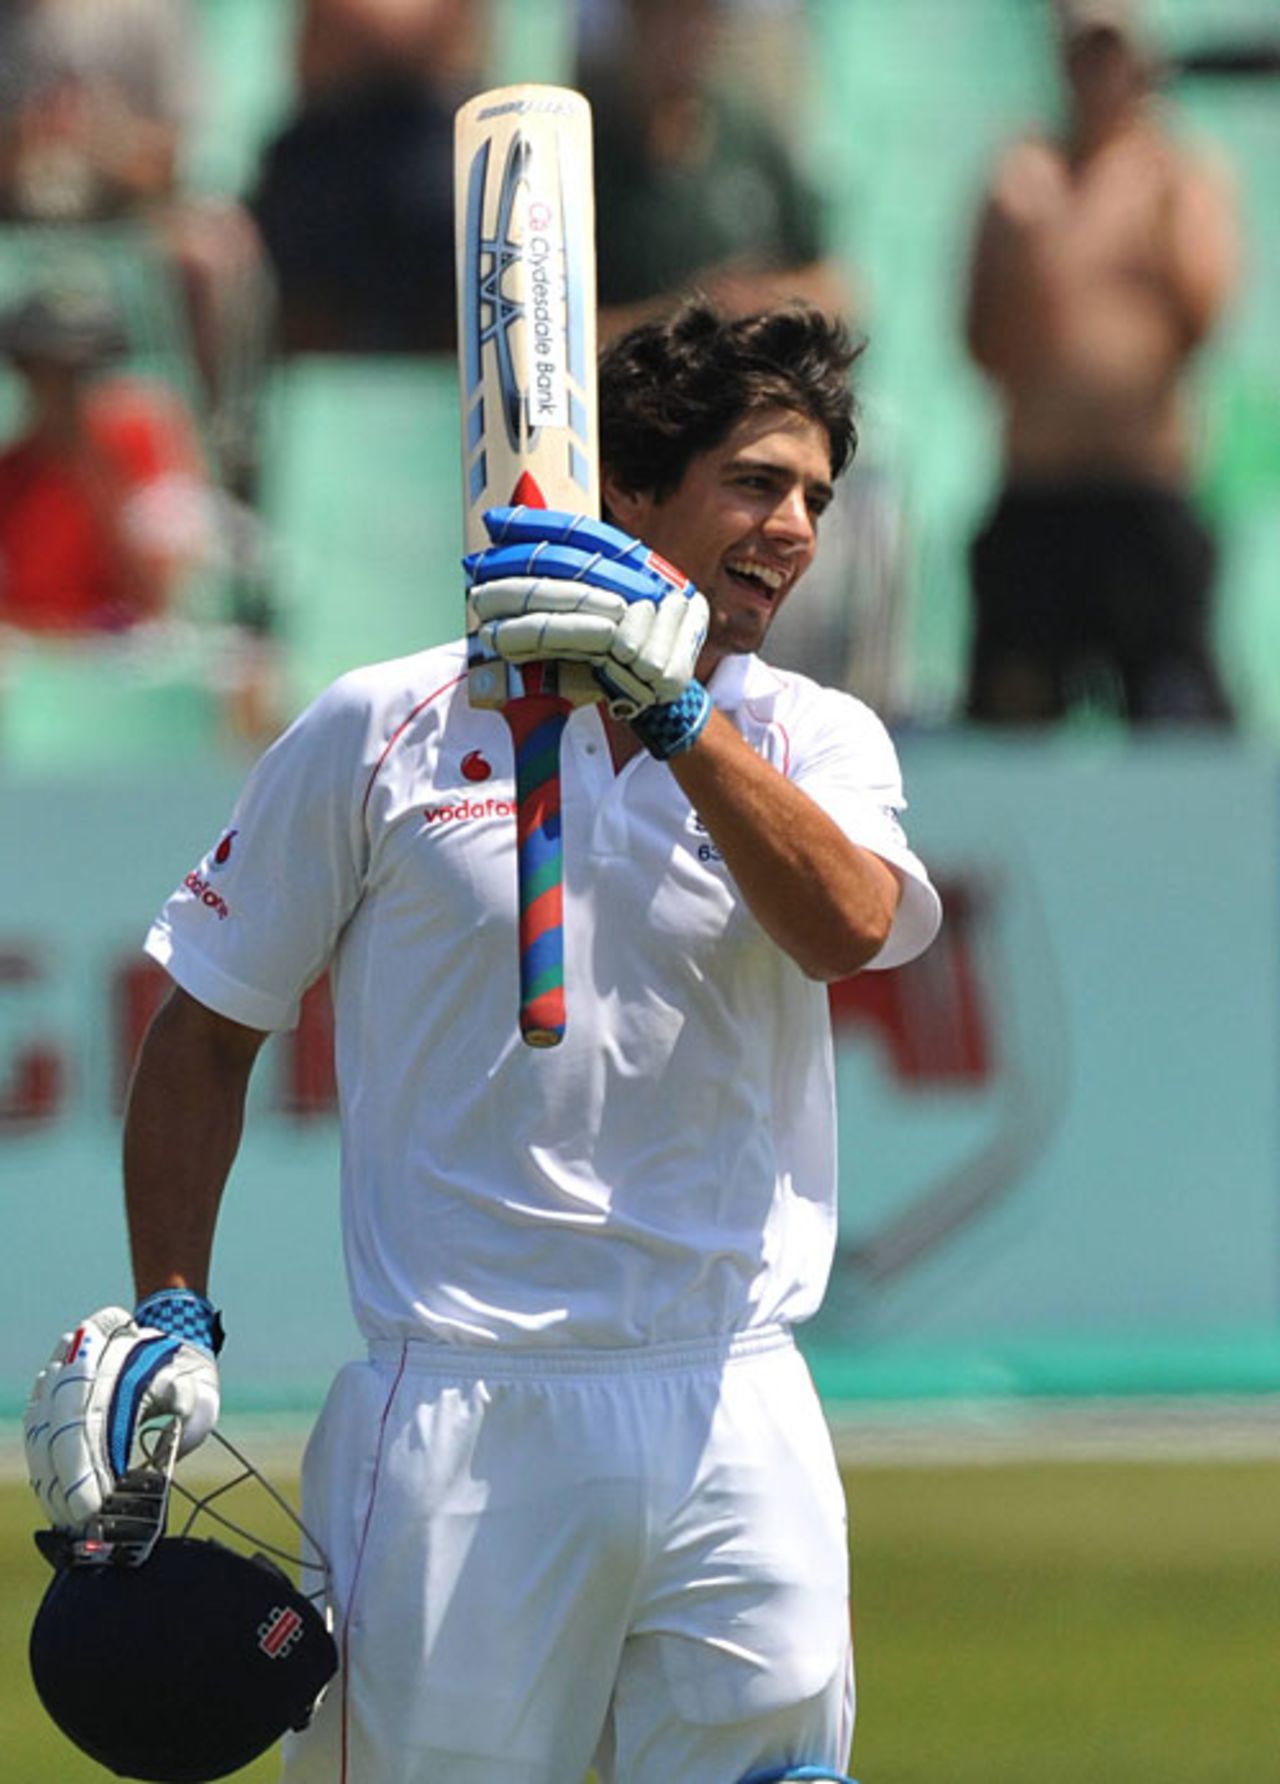 Alastair Cook was delighted to complete his 10th Test century, South Africa v England, 2nd Test, Durban, December 28, 2009 